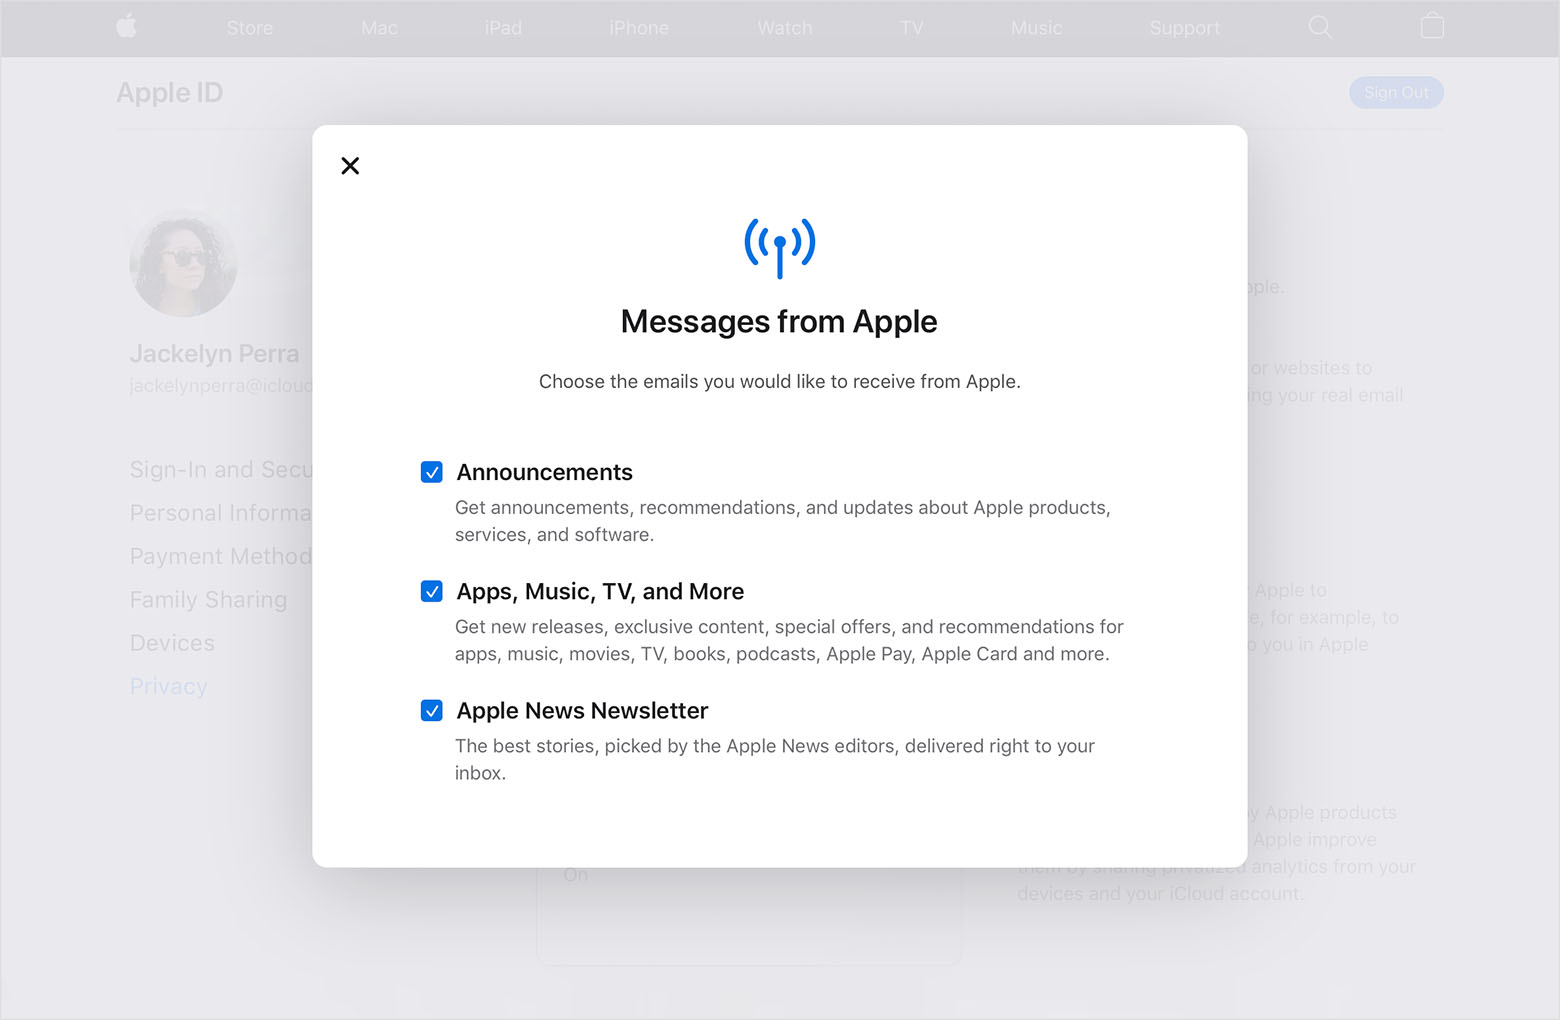 https://cdsassets.apple.com/live/7WUAS350/images/icloud/web-browser-appleid-apple-com-privacy-messages-from-apple.jpg